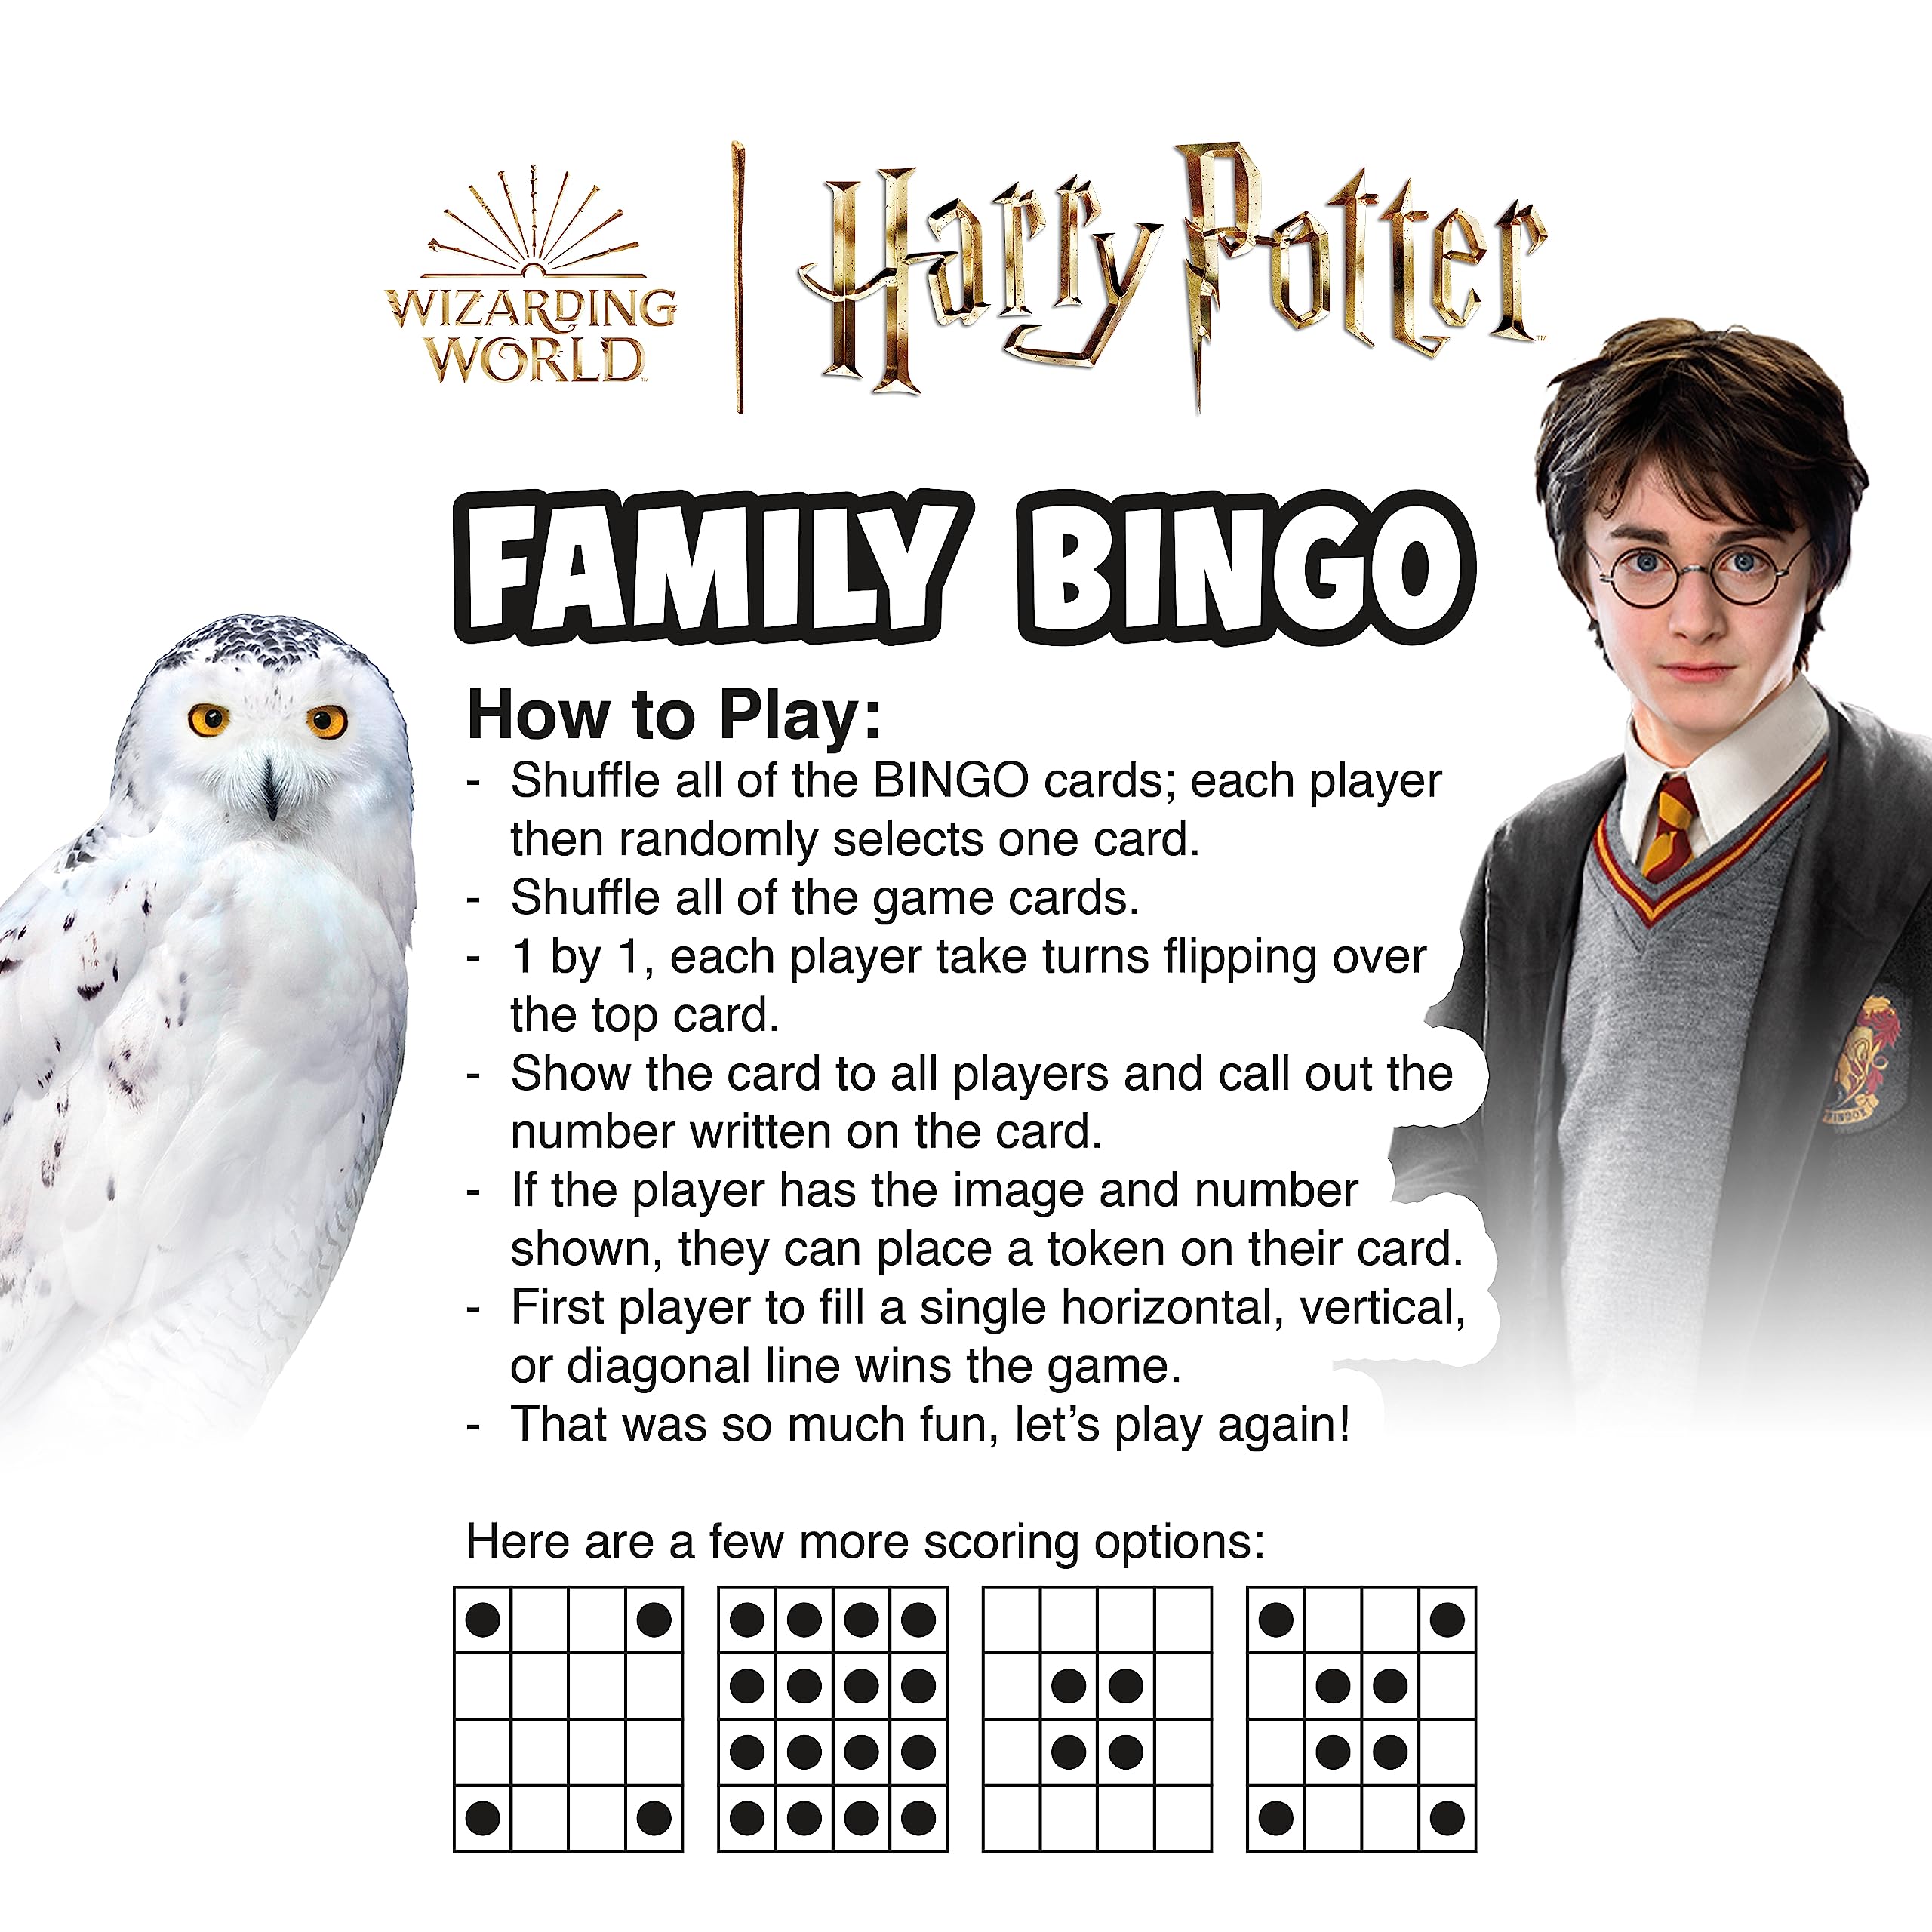 AQUARIUS Harry Potter Family Bingo Game - Fun Family Party Game for Kids, Teens & Adults - Entertaining Game Night Gift - Officially Licensed Harry Potter Merchandise